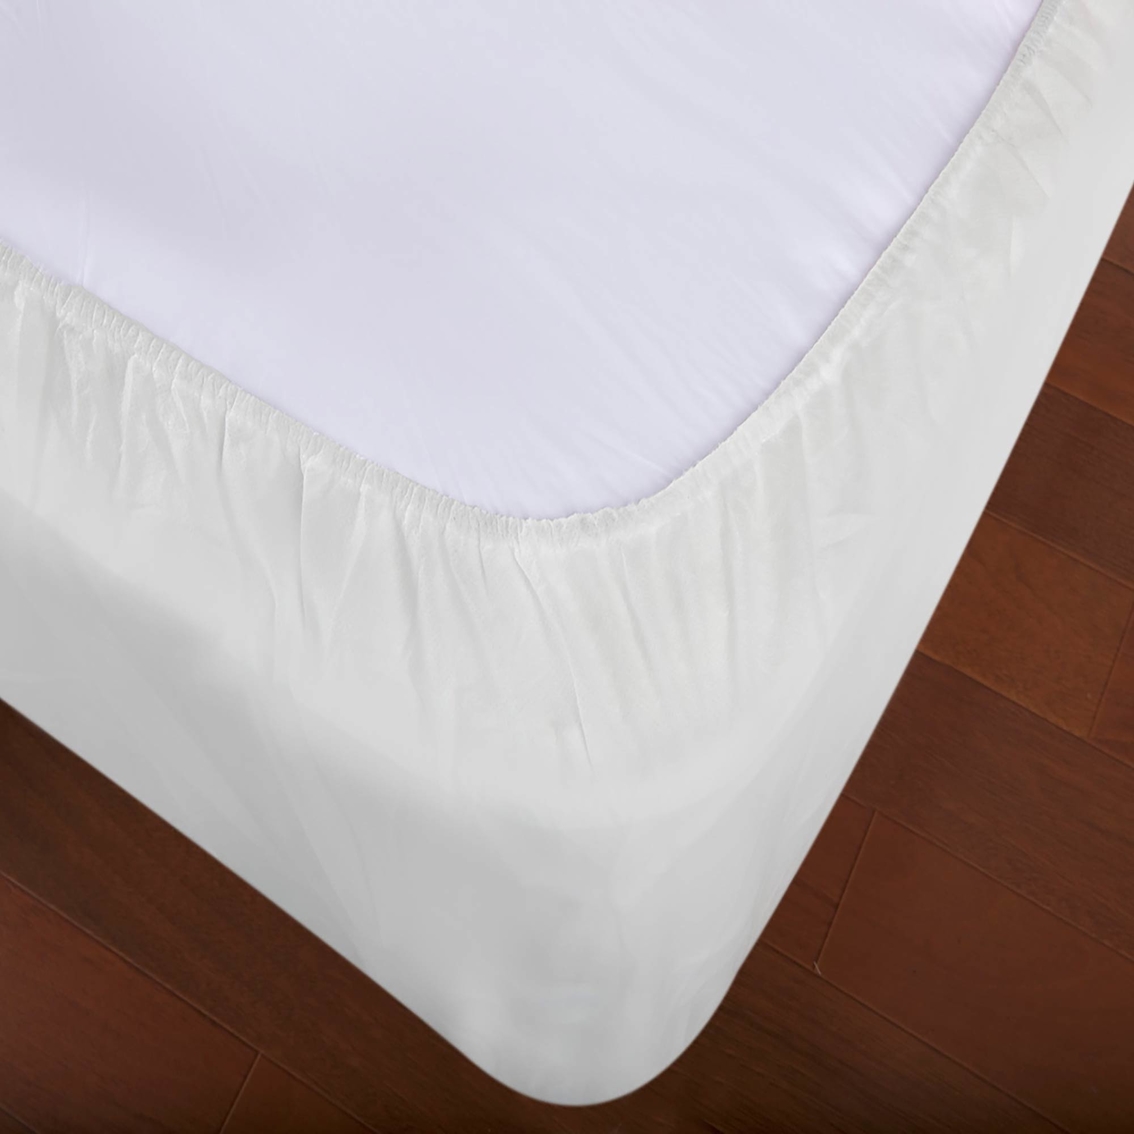 Home Details Kennedy's Home Collection Antibacterial Mattress Pad - Image 2 of 4